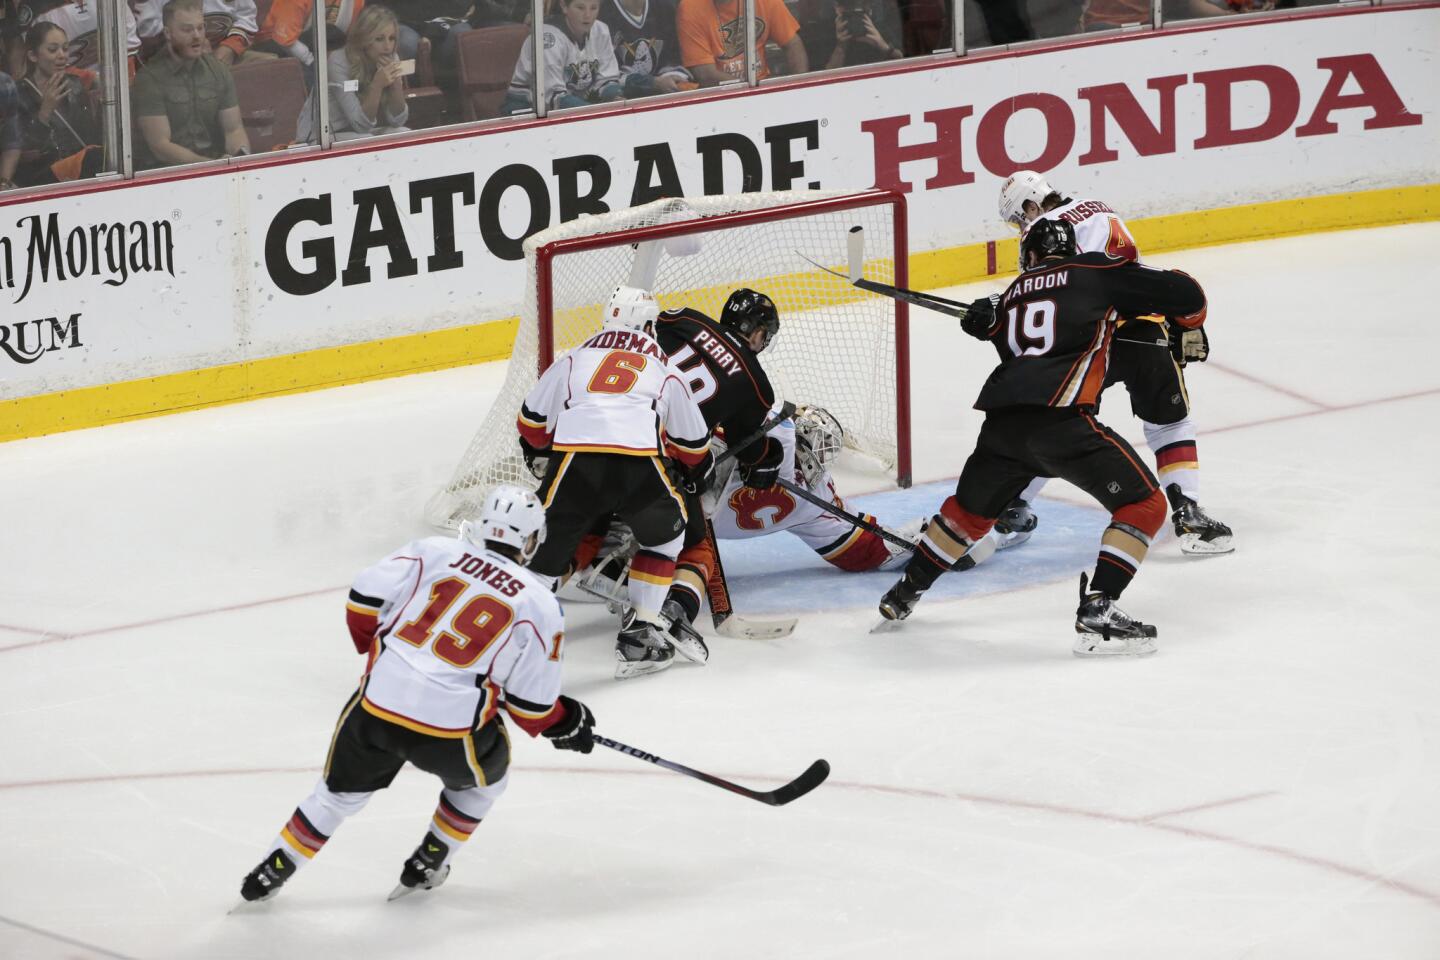 Corey Perry scores the game-winning goal against the Calgary Flames in overtimes, sending the Ducks to the Western Conference finals for the first time since 2007.